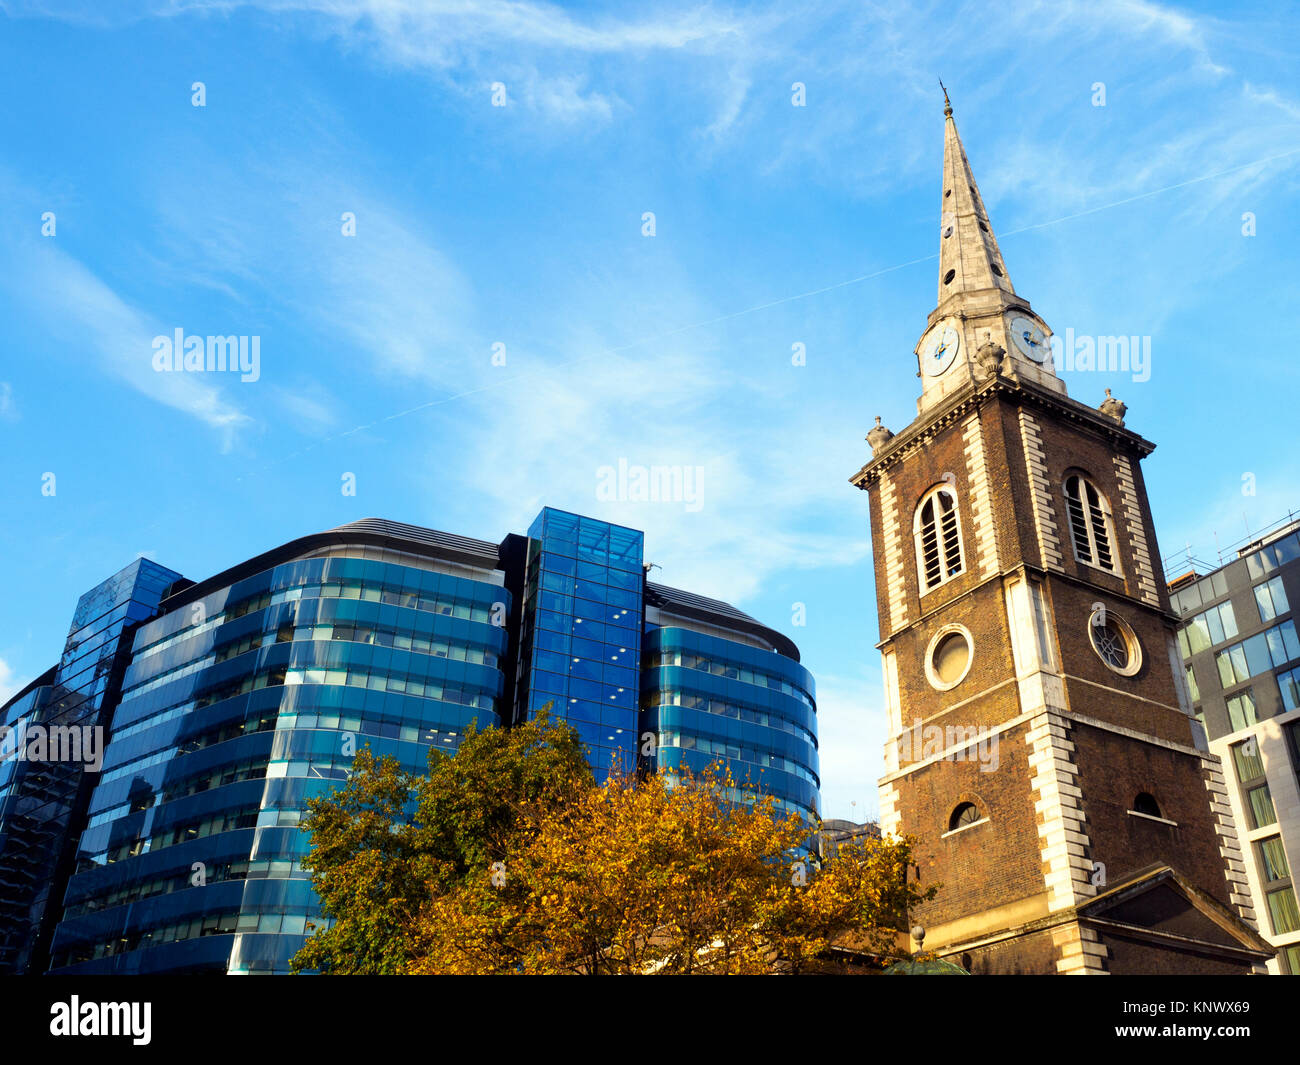 The St Botolph Building and St Botolph's Aldgate parich Church - London, England Stock Photo